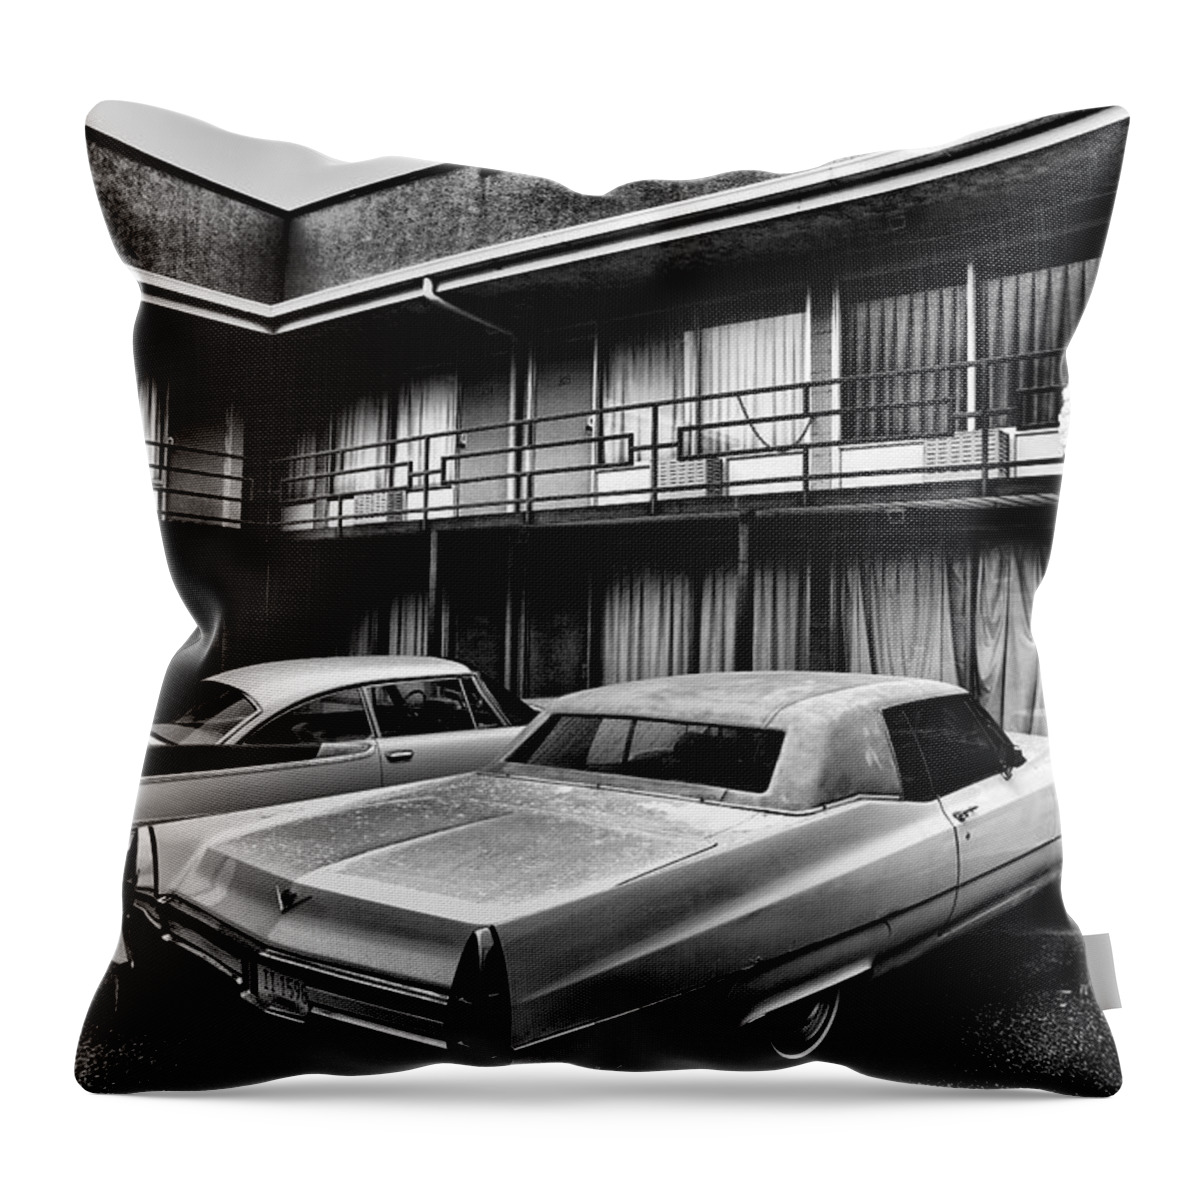 Memphis Throw Pillow featuring the photograph Room 306 at the Lorraine Hotel by Stephen Stookey